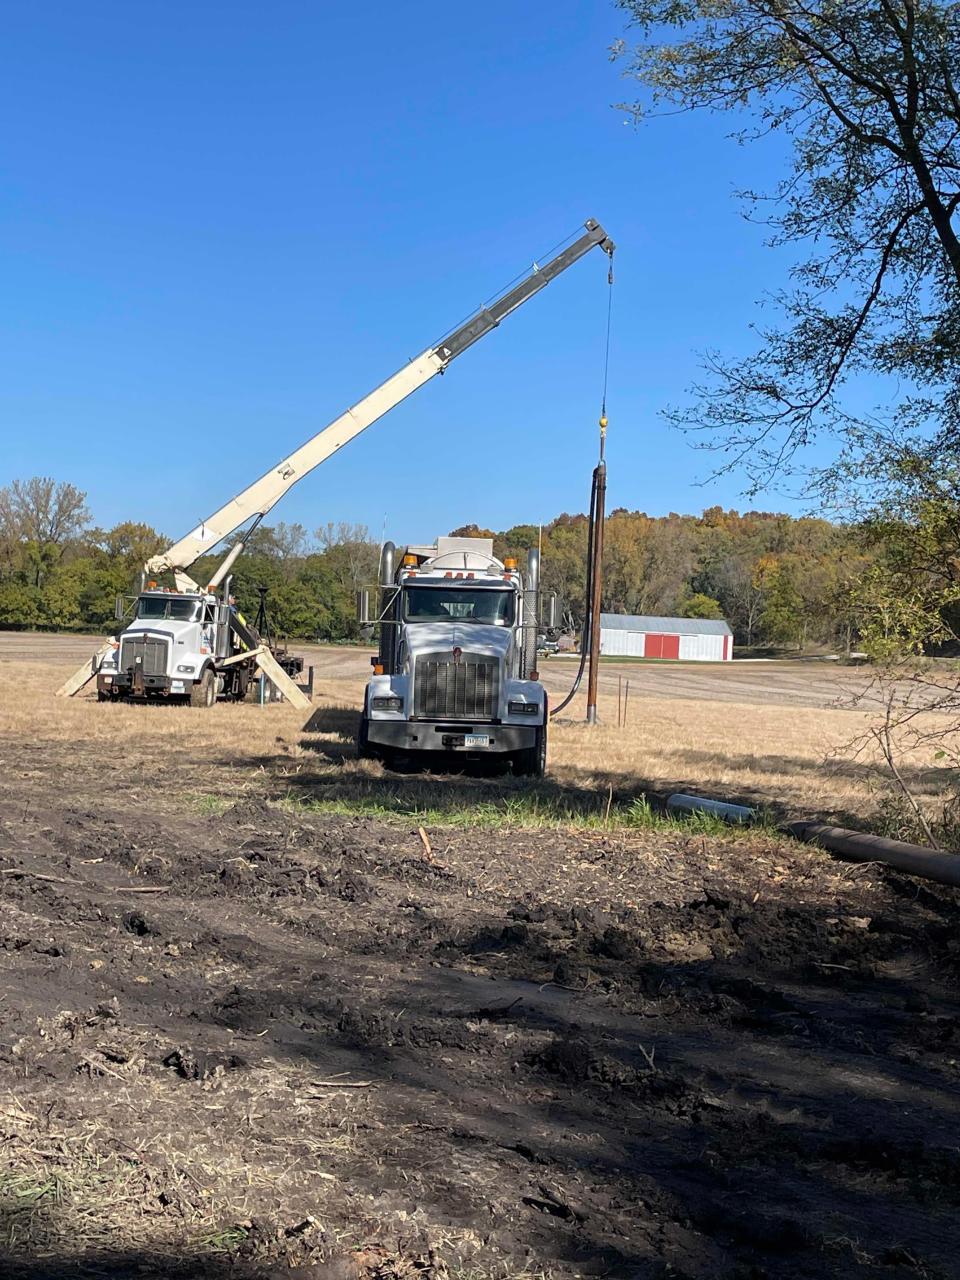 A test well installation was performed by the city of Ames to verify appropriate screen size and well depth for the water wells coming to North River Valley Park in December of 2024.